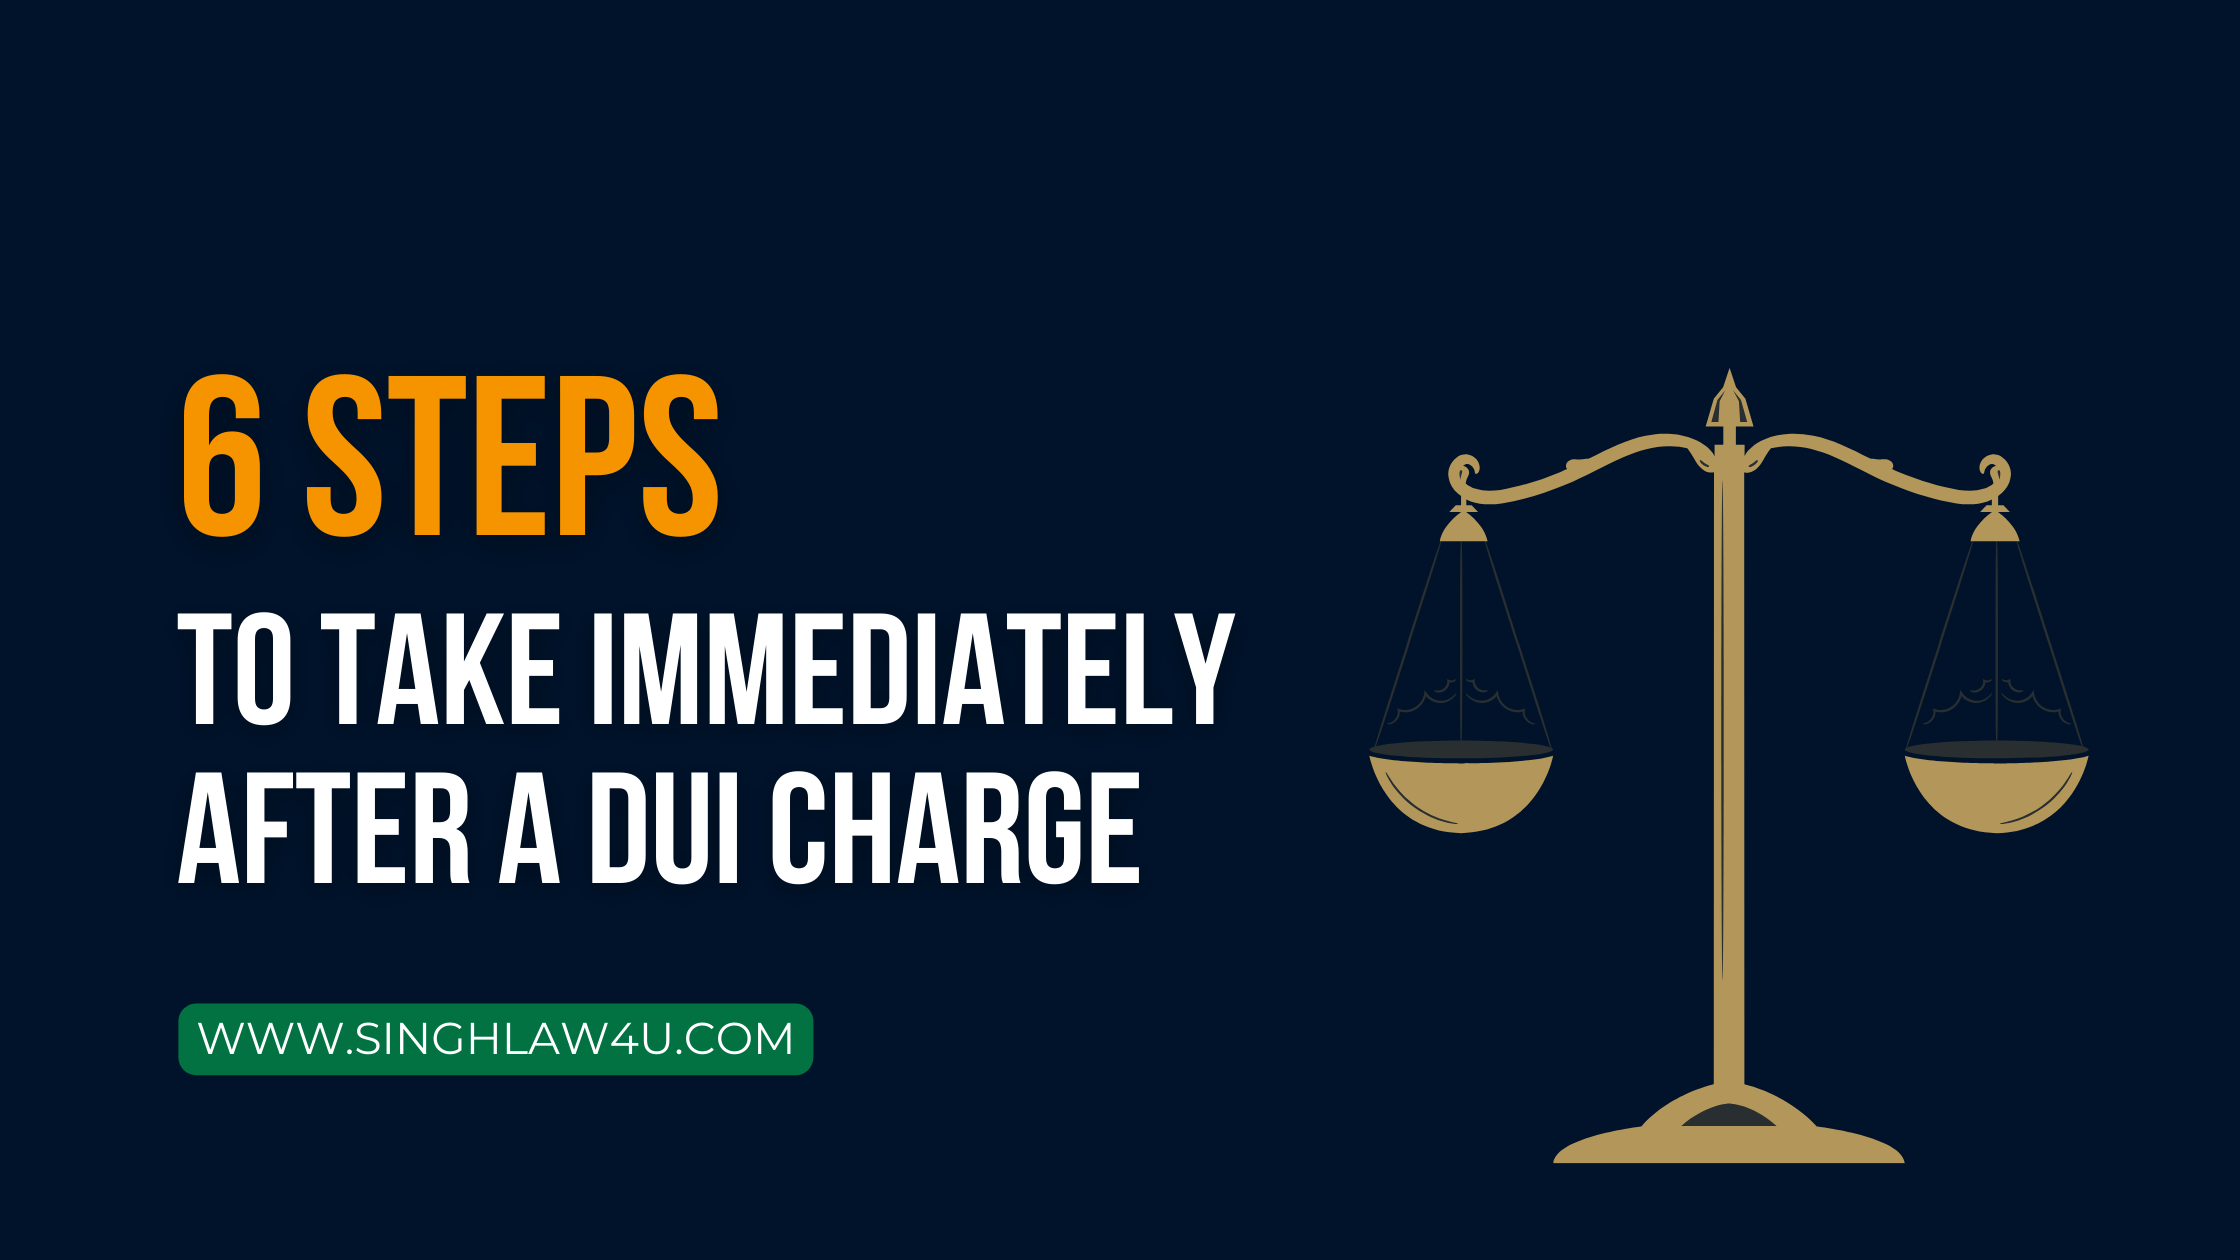 6 Steps To Take Immediately After A DUI Charge